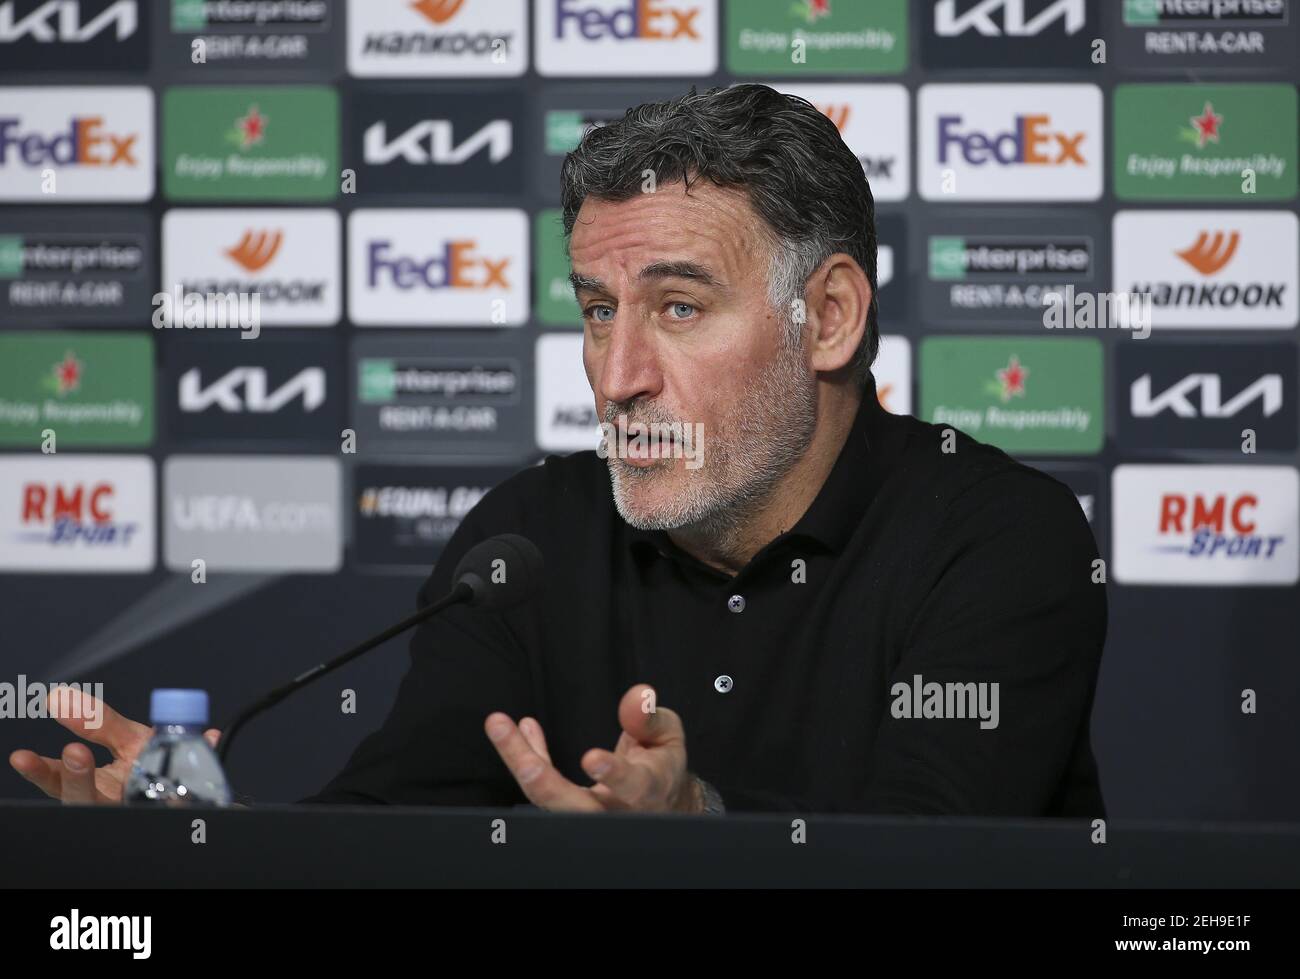 Coach of Lille OSC Christophe Galtier answers to the media during the post-match press conference following the UEFA Europa Leag / LM Stock Photo